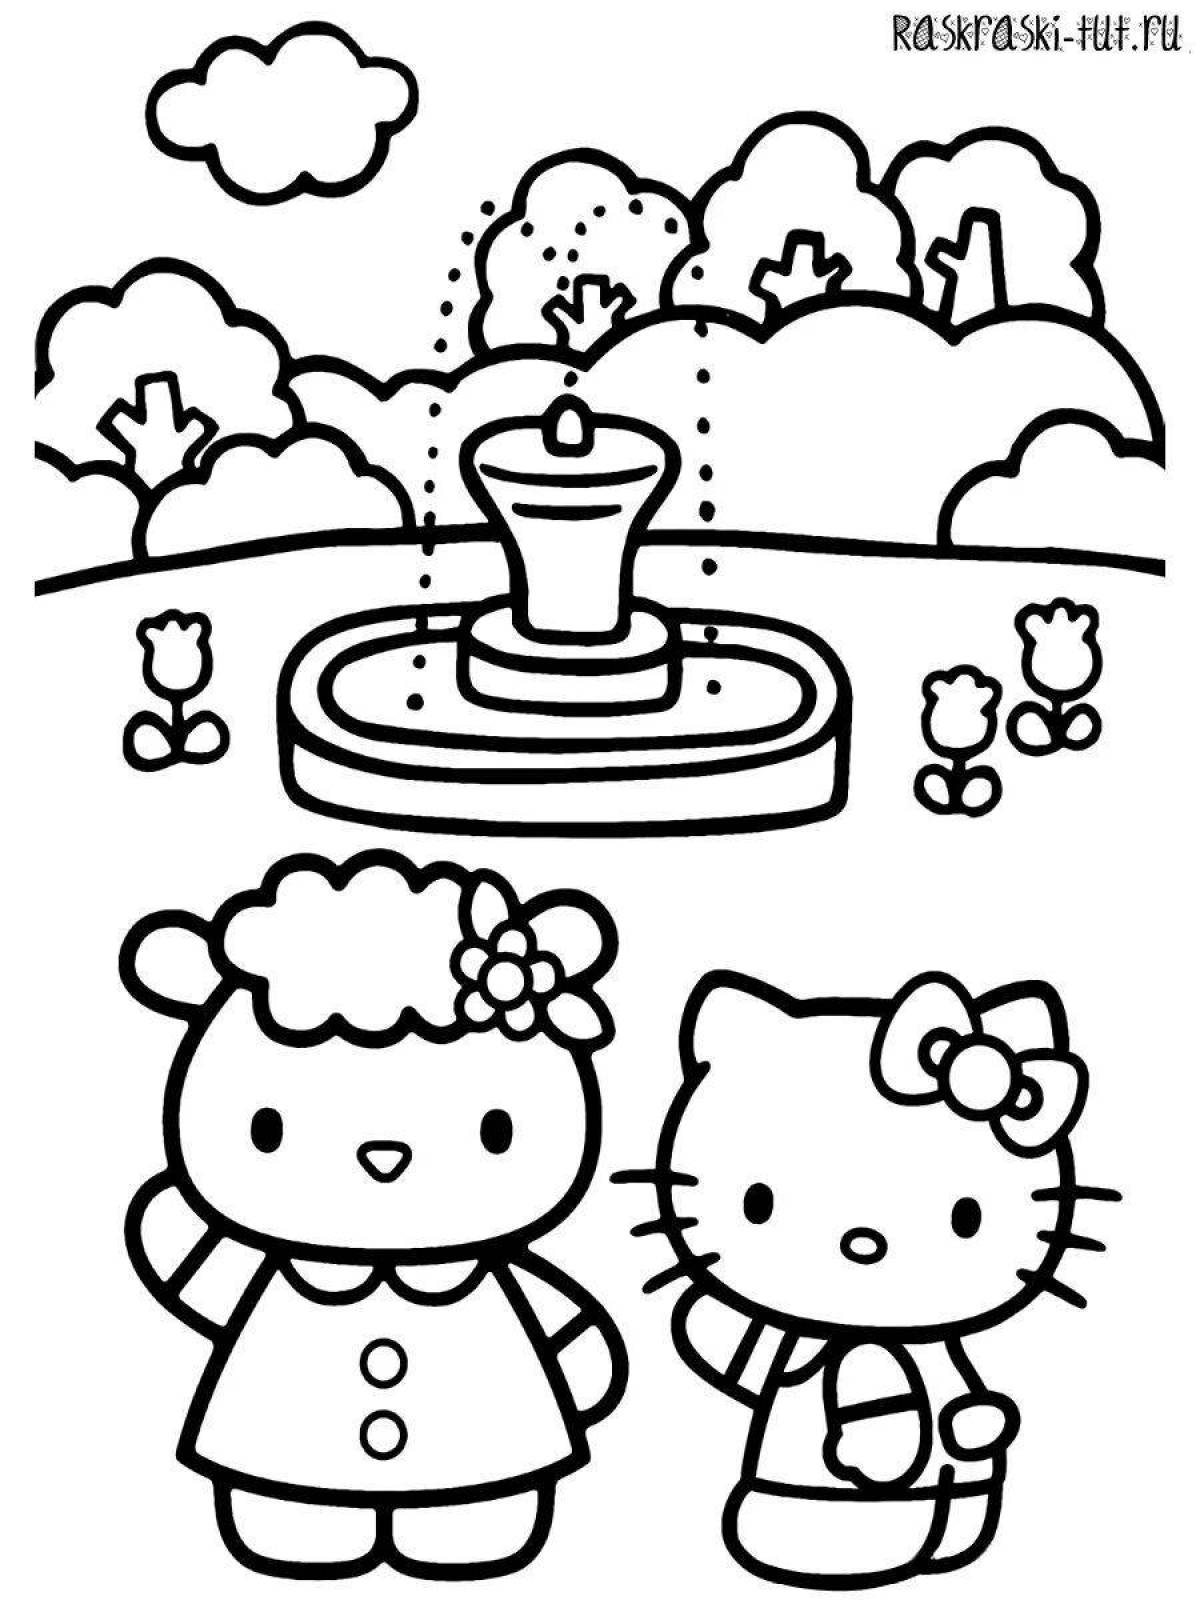 A lot of little hello kitty #3